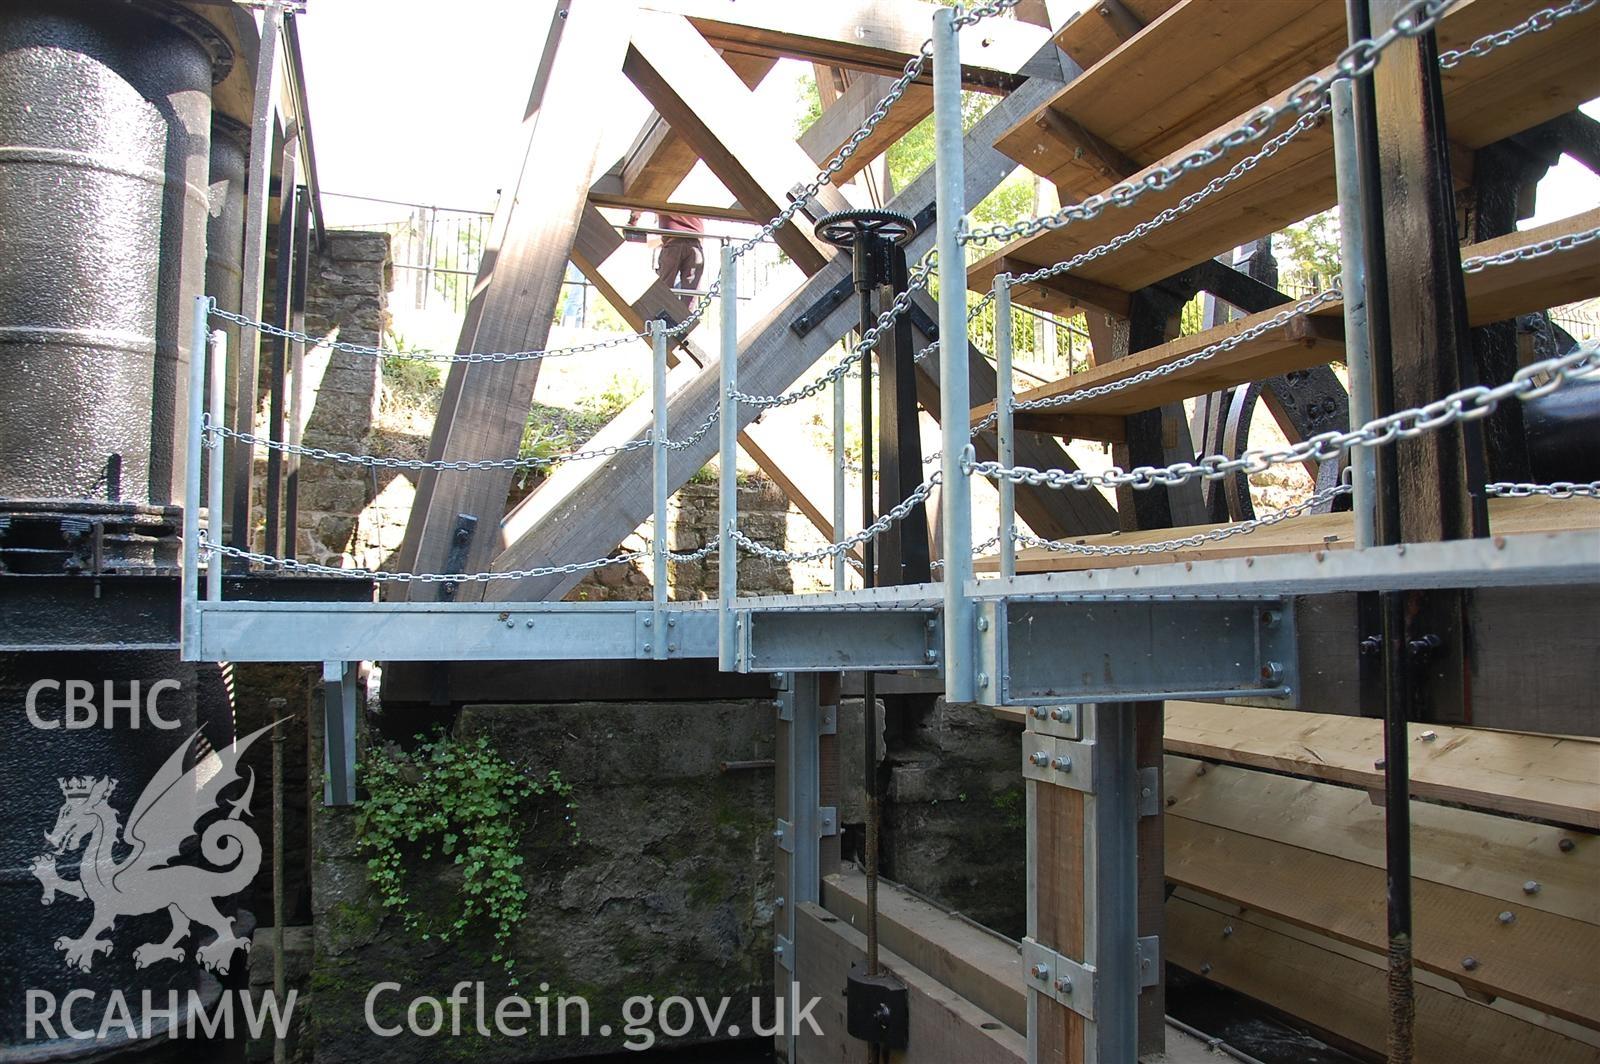 Digital image relating to Melingriffith Water Pump: Walkway support steelwork fixed to sluice gate frame and masonry wall.